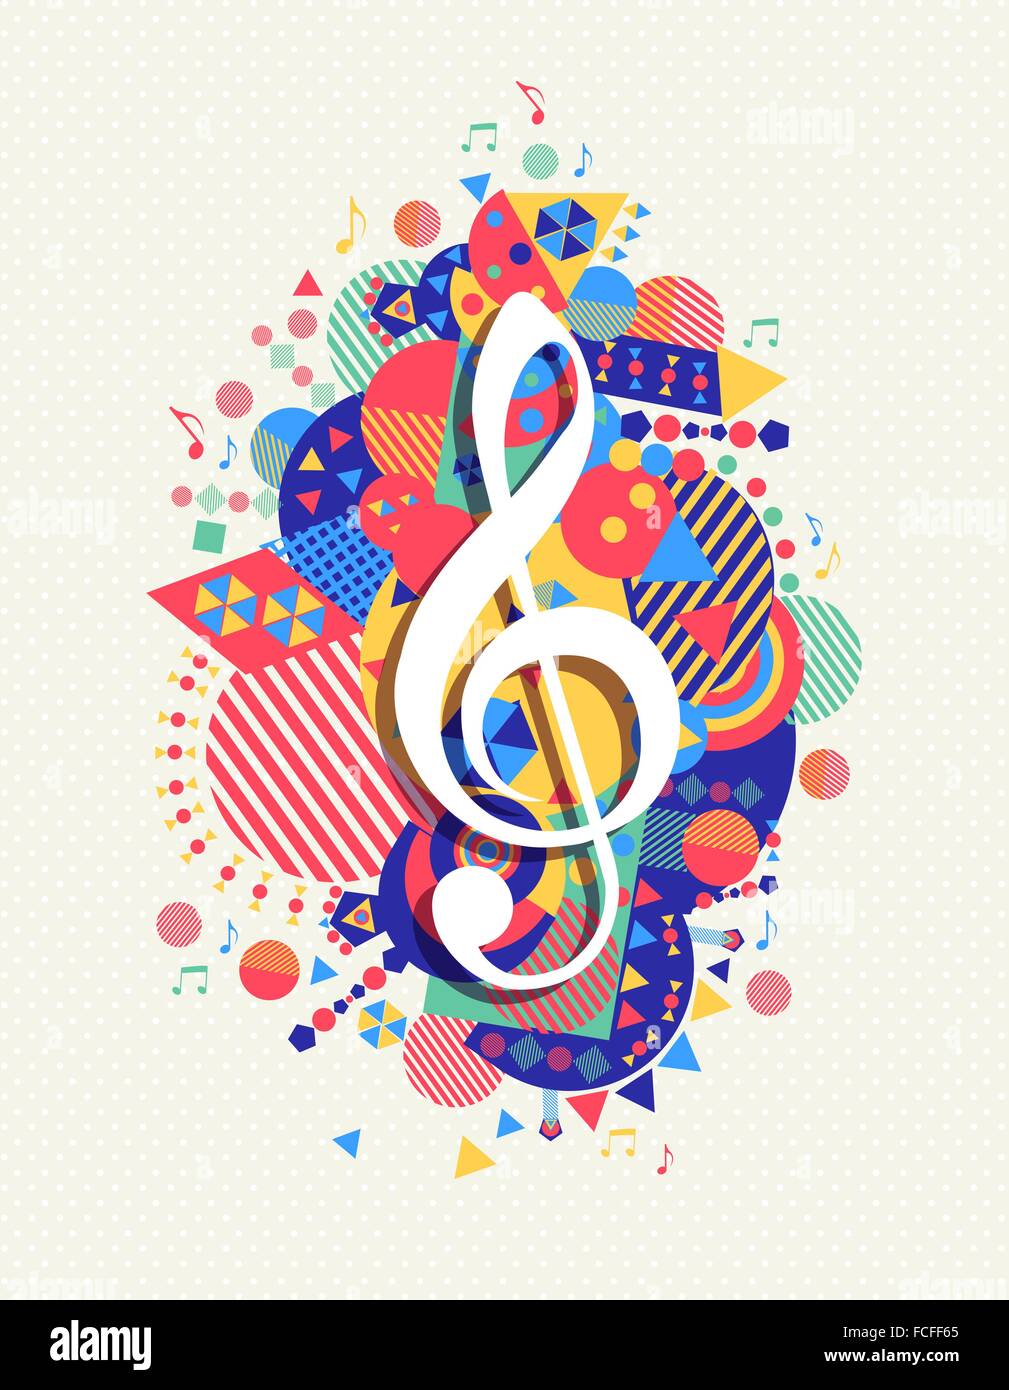 Music note g treble clef icon concept design with colorful geometry element background. EPS10 vector. Stock Vector